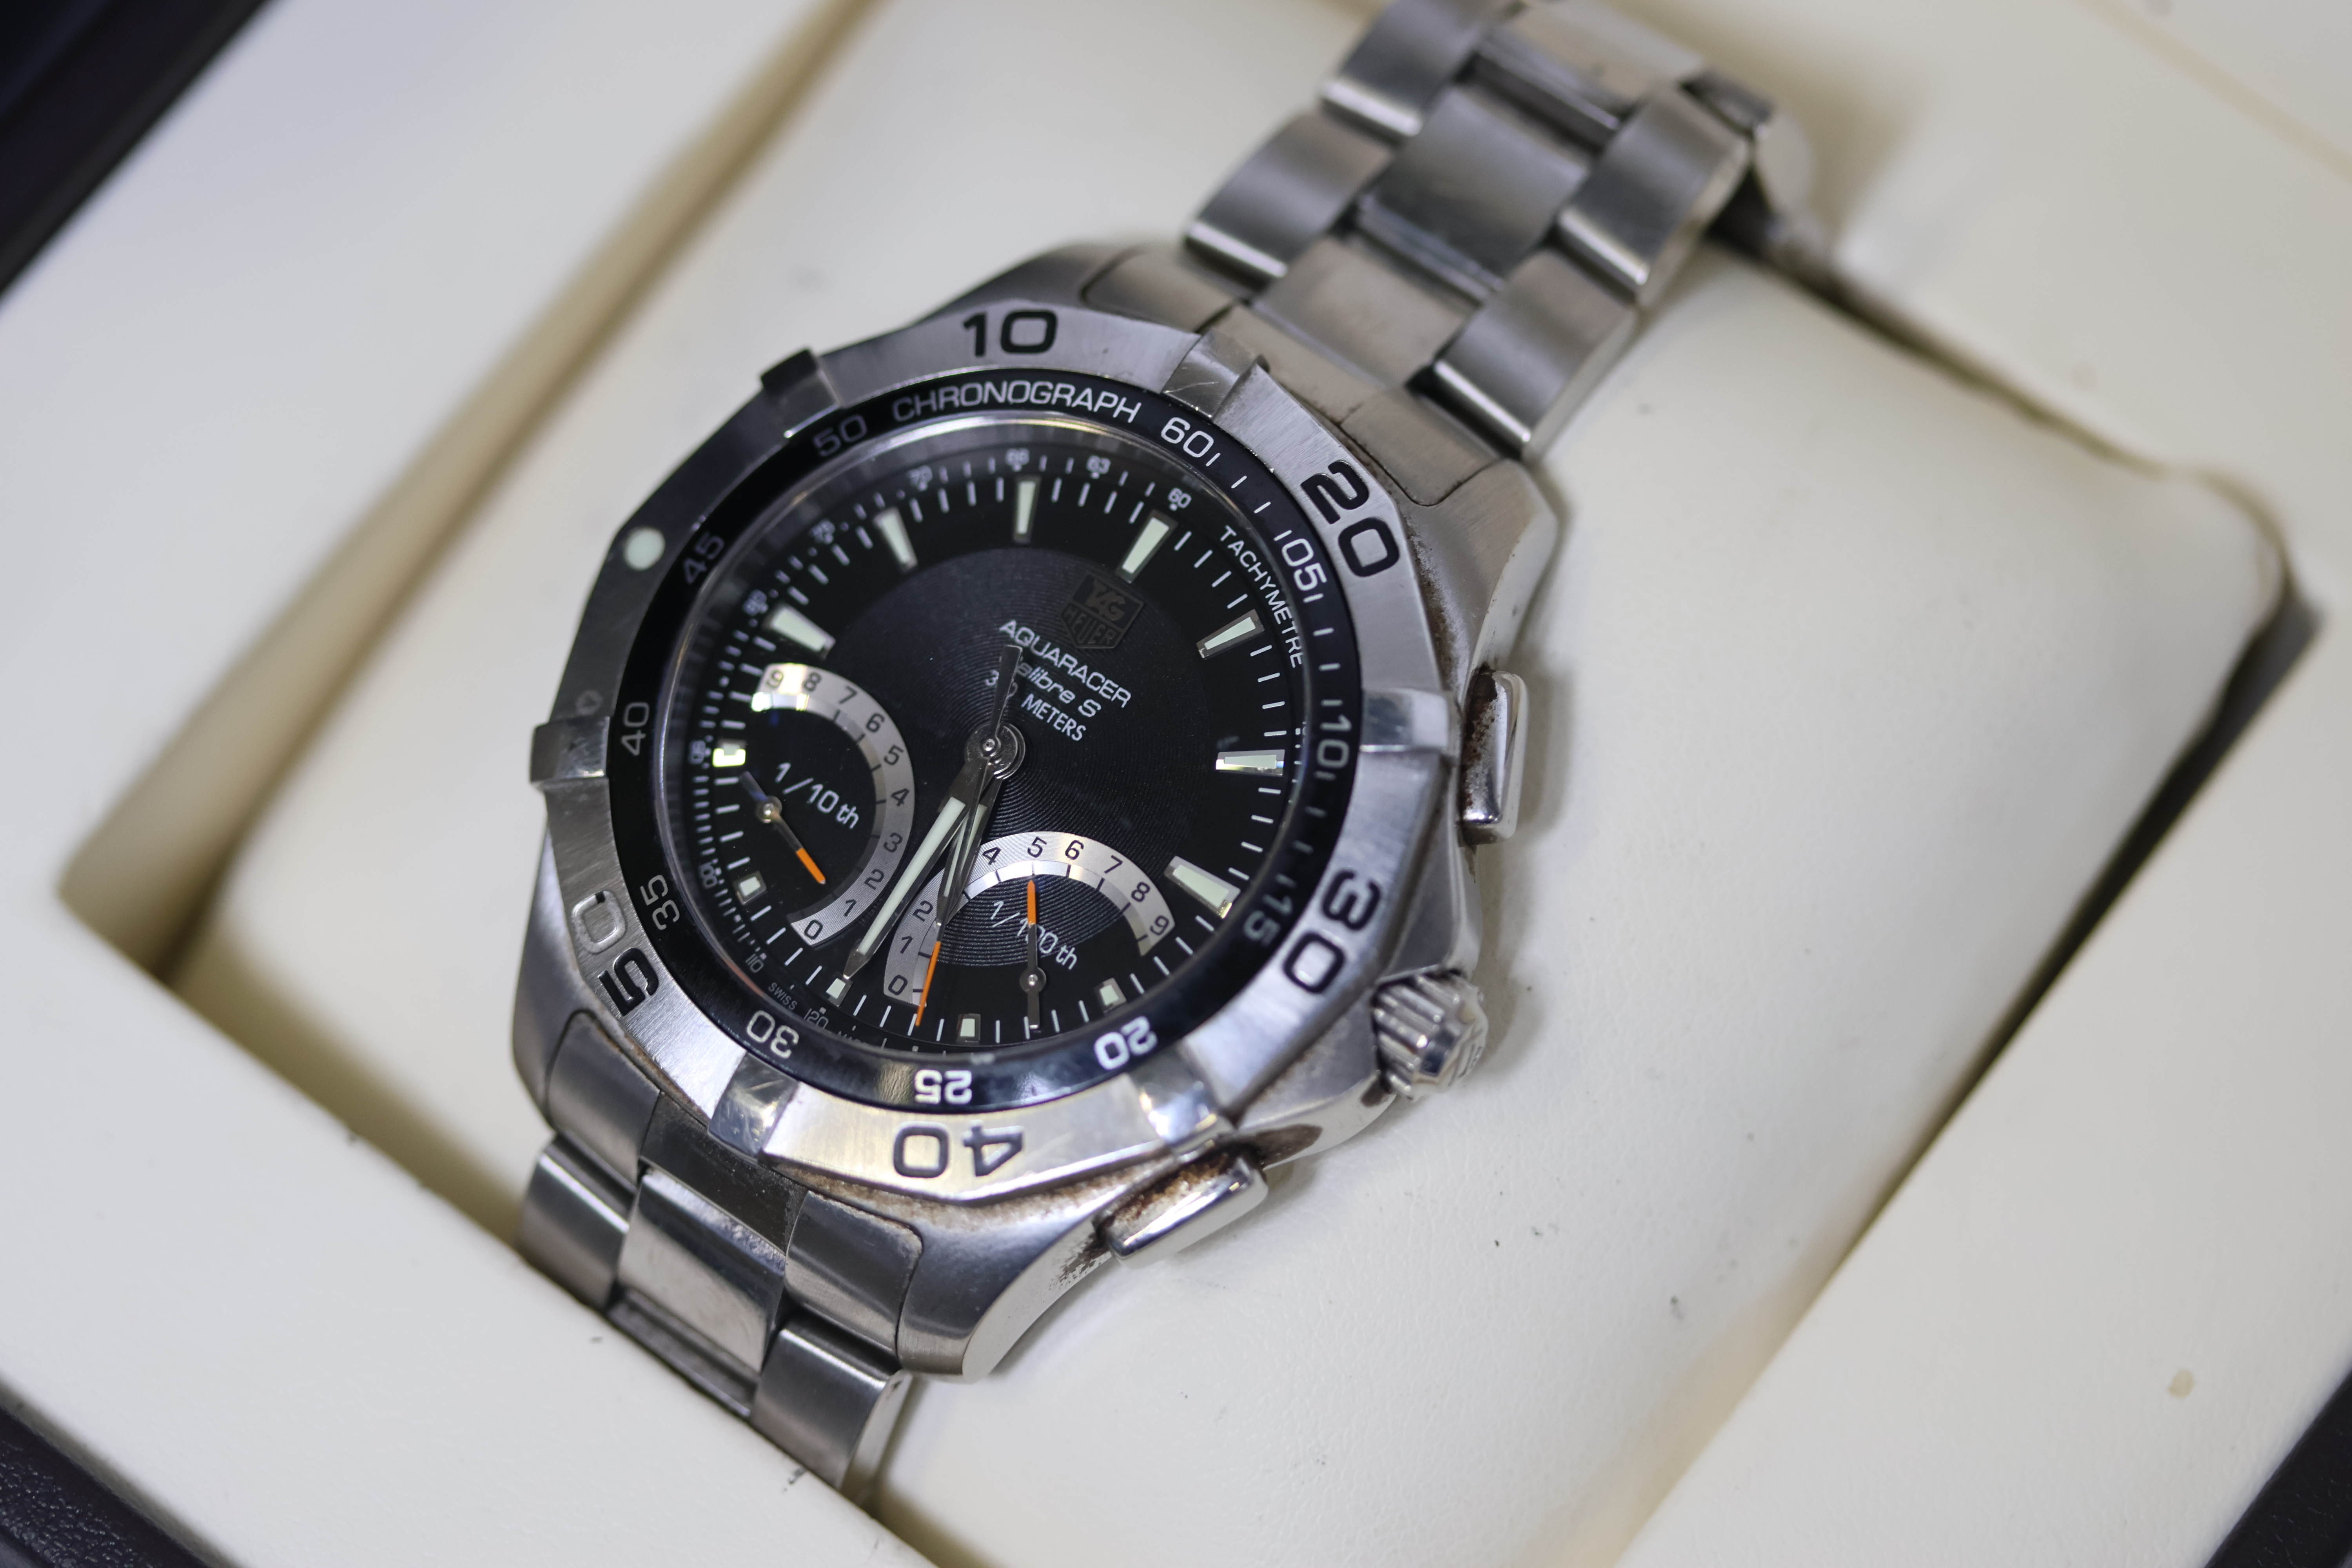 TAG HEUER AQUARACER CALIBRE S REFERENCE CAF7010 WITH BOX AND PAPERS 2014, black dial, chronograph to - Image 6 of 7